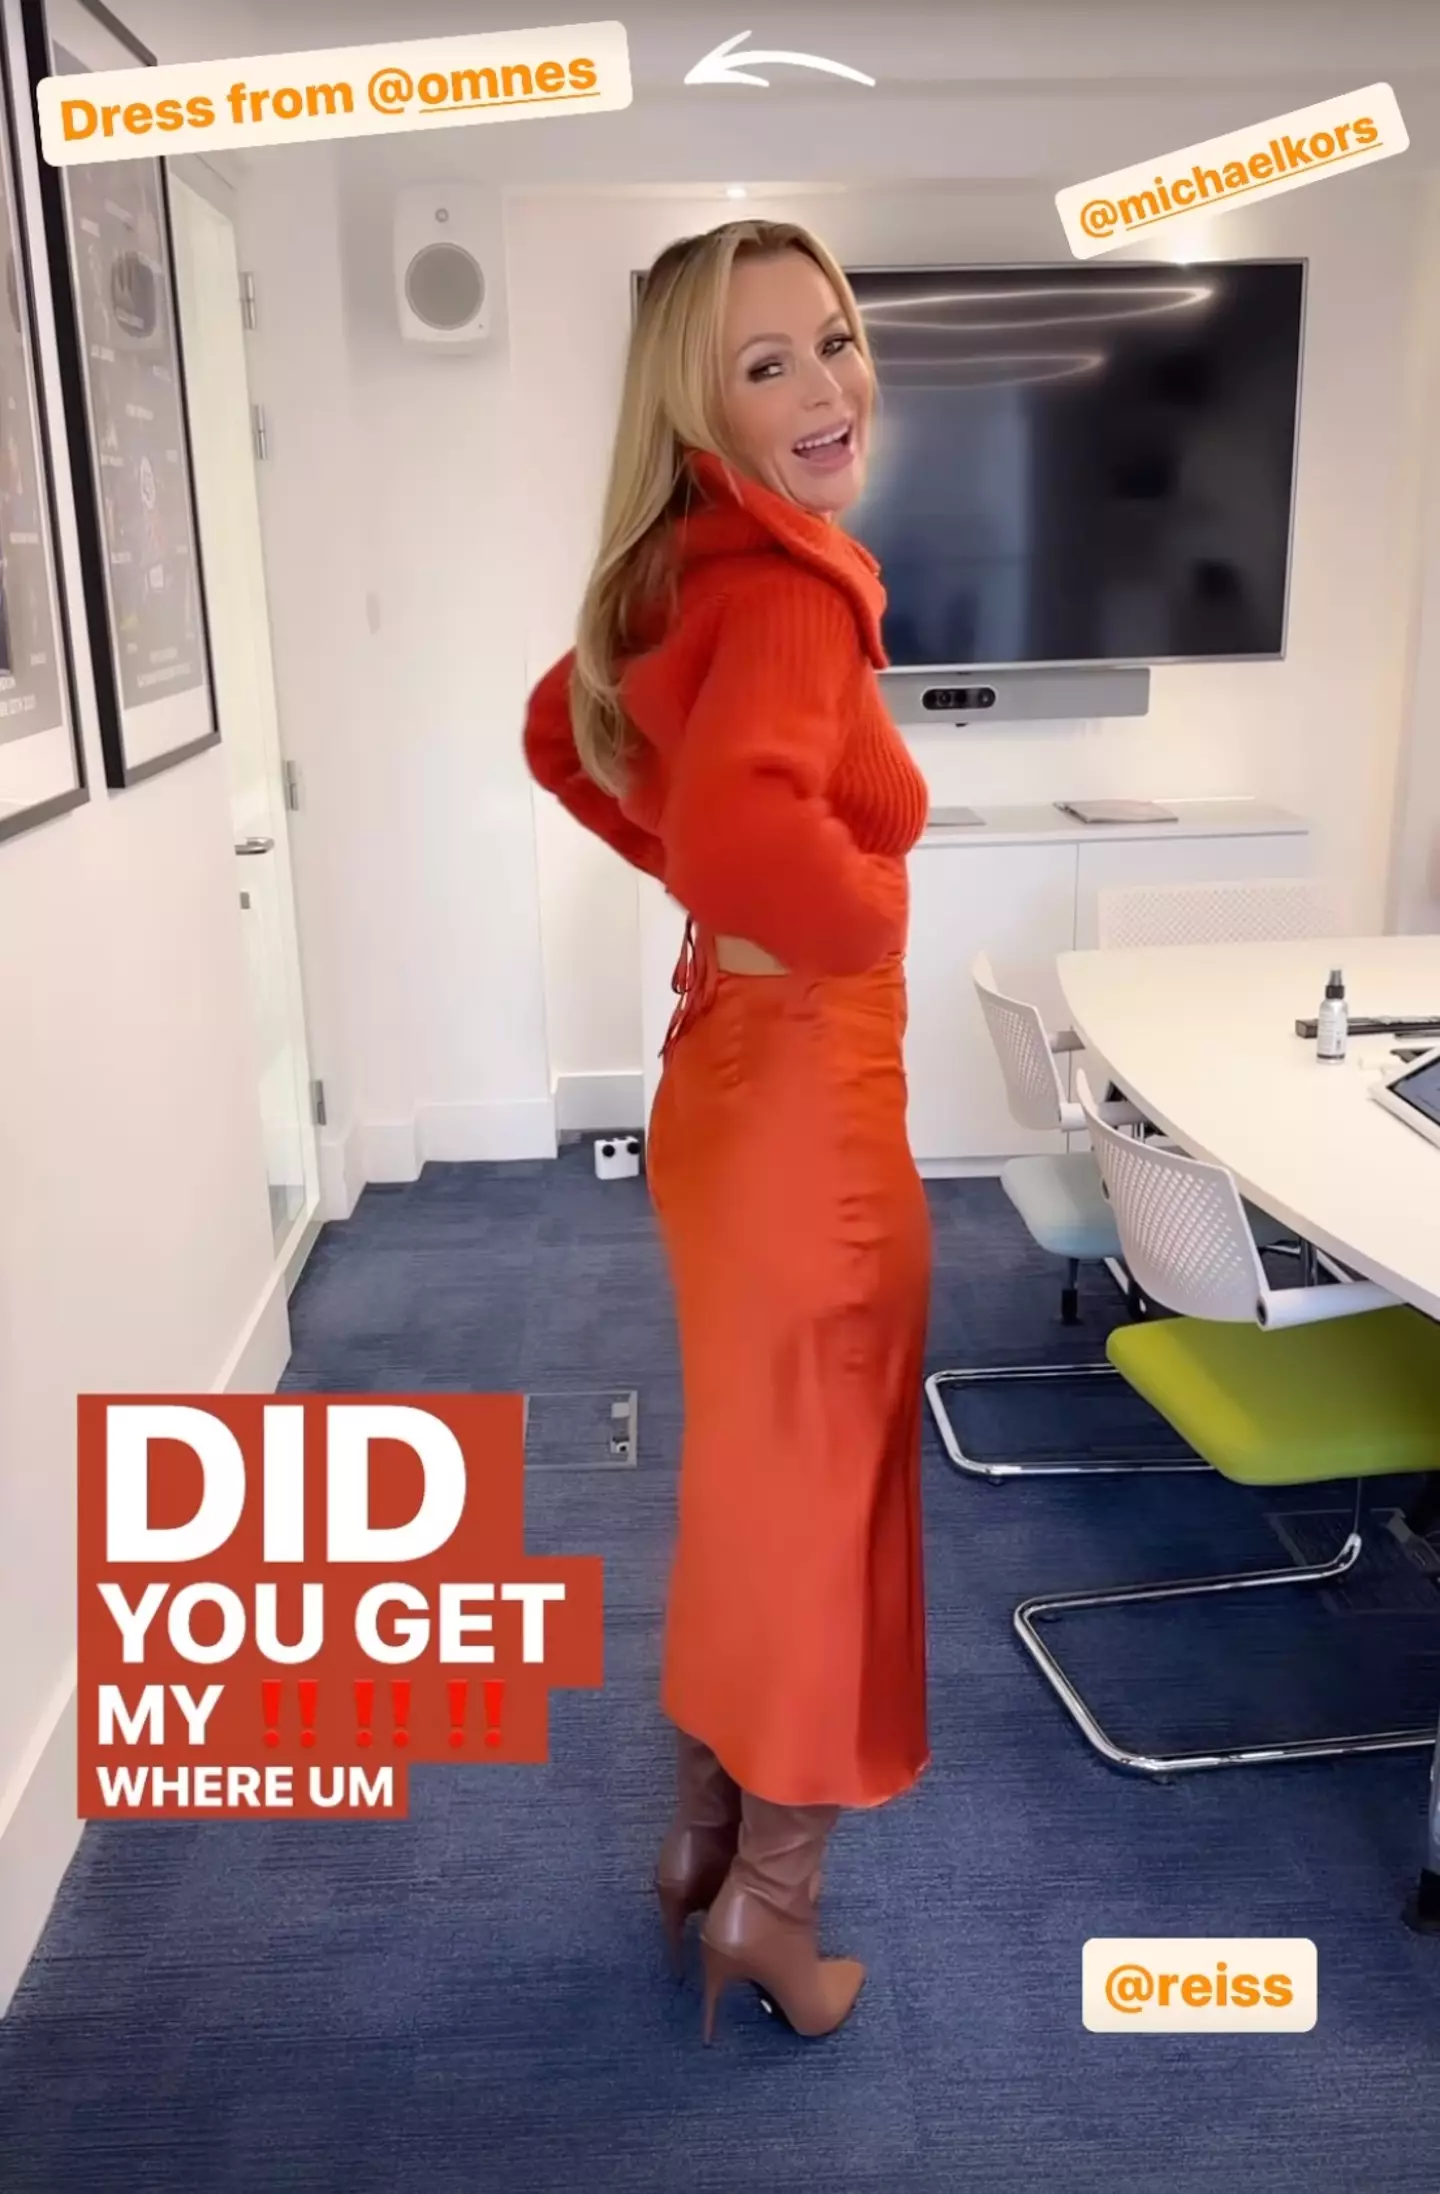 Amanda Holden shocks fans by flashing her nipple in racy home video